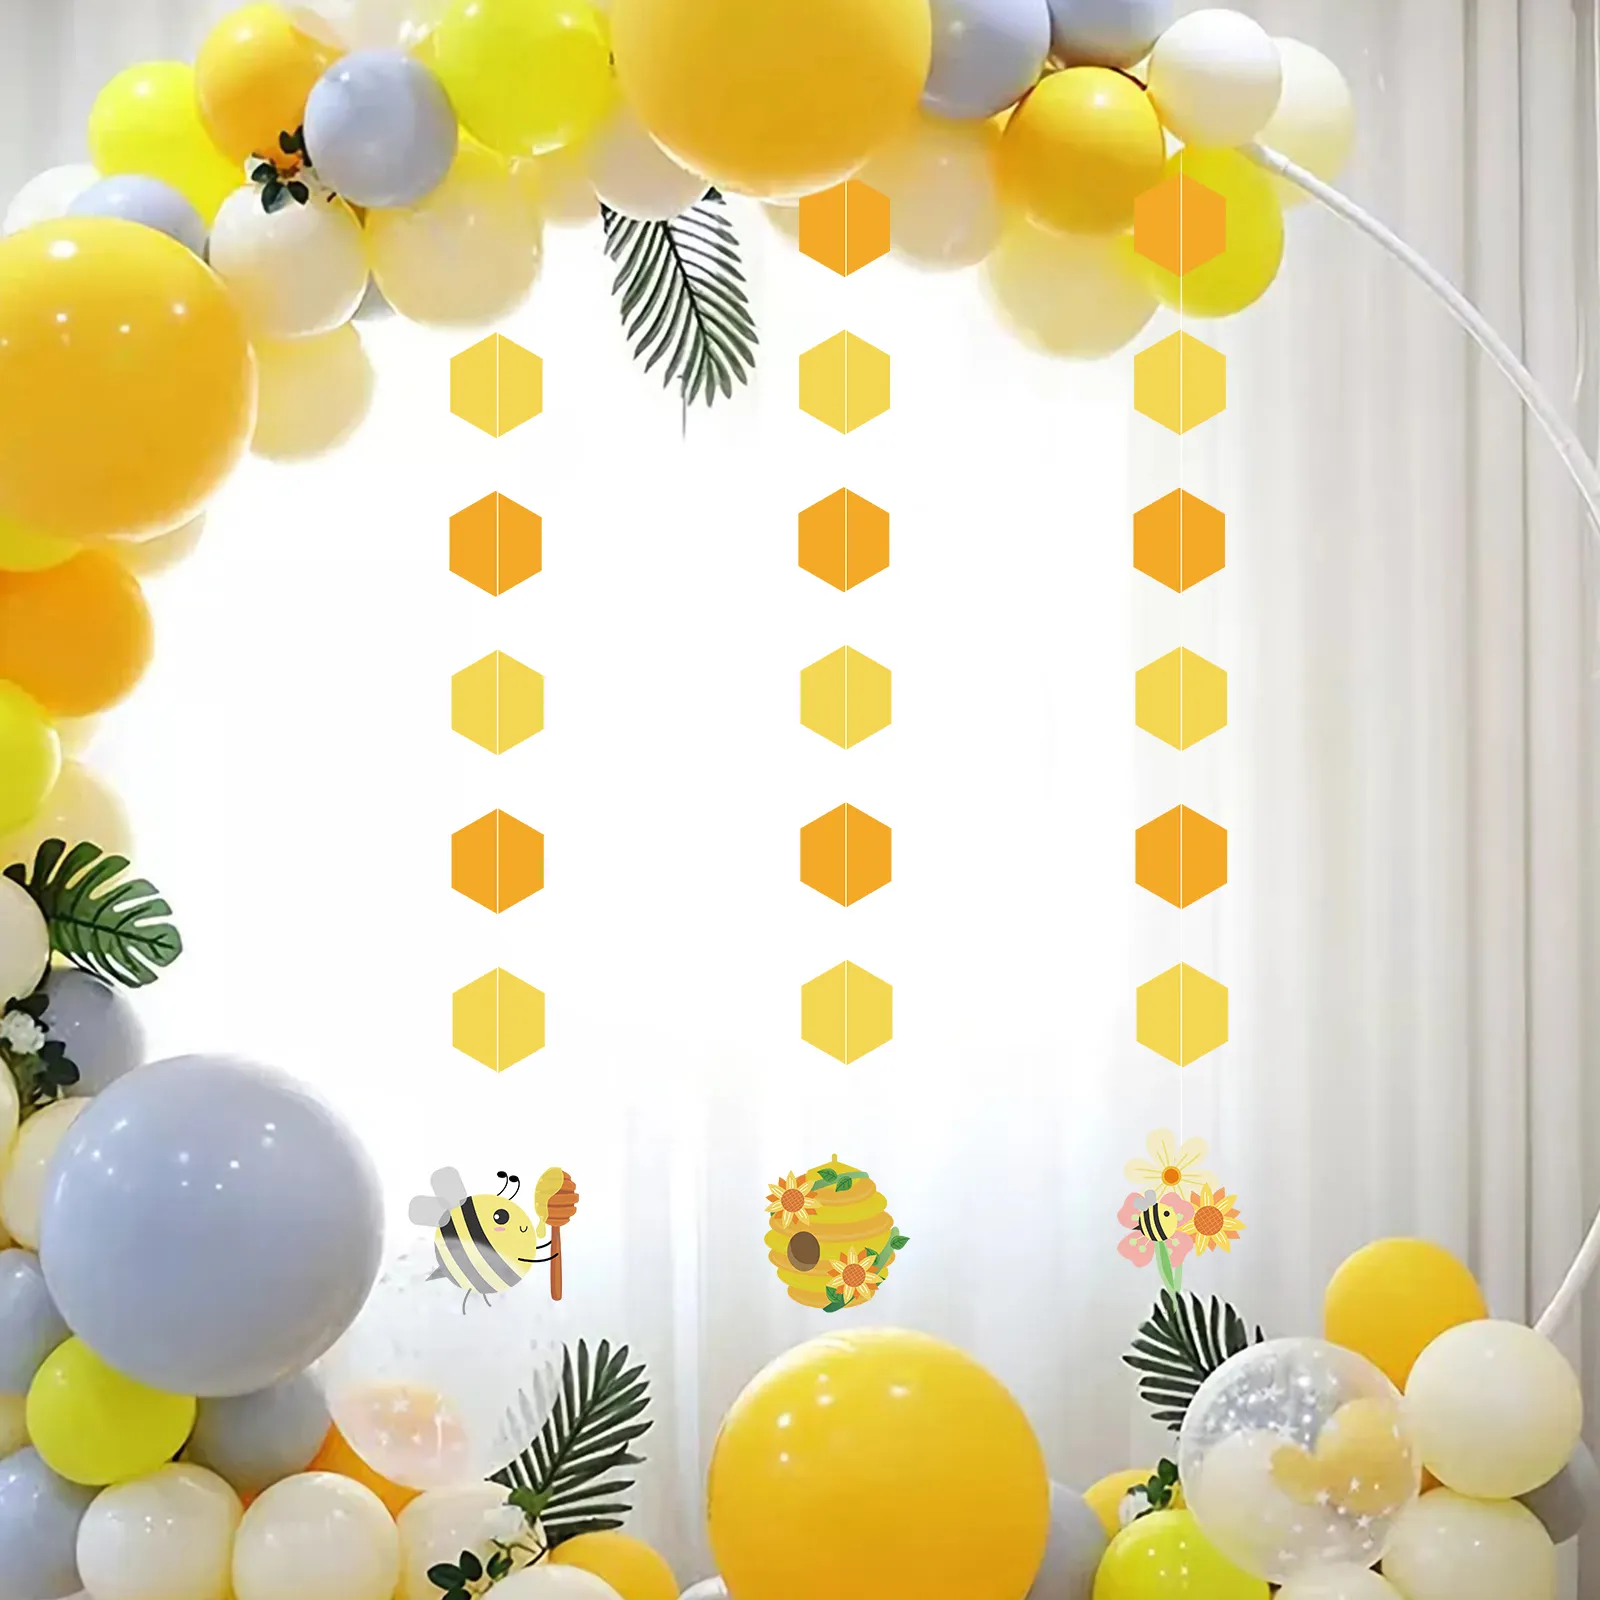 New 3 PCS Bee Themed Paper Garland Set for Party Decoration